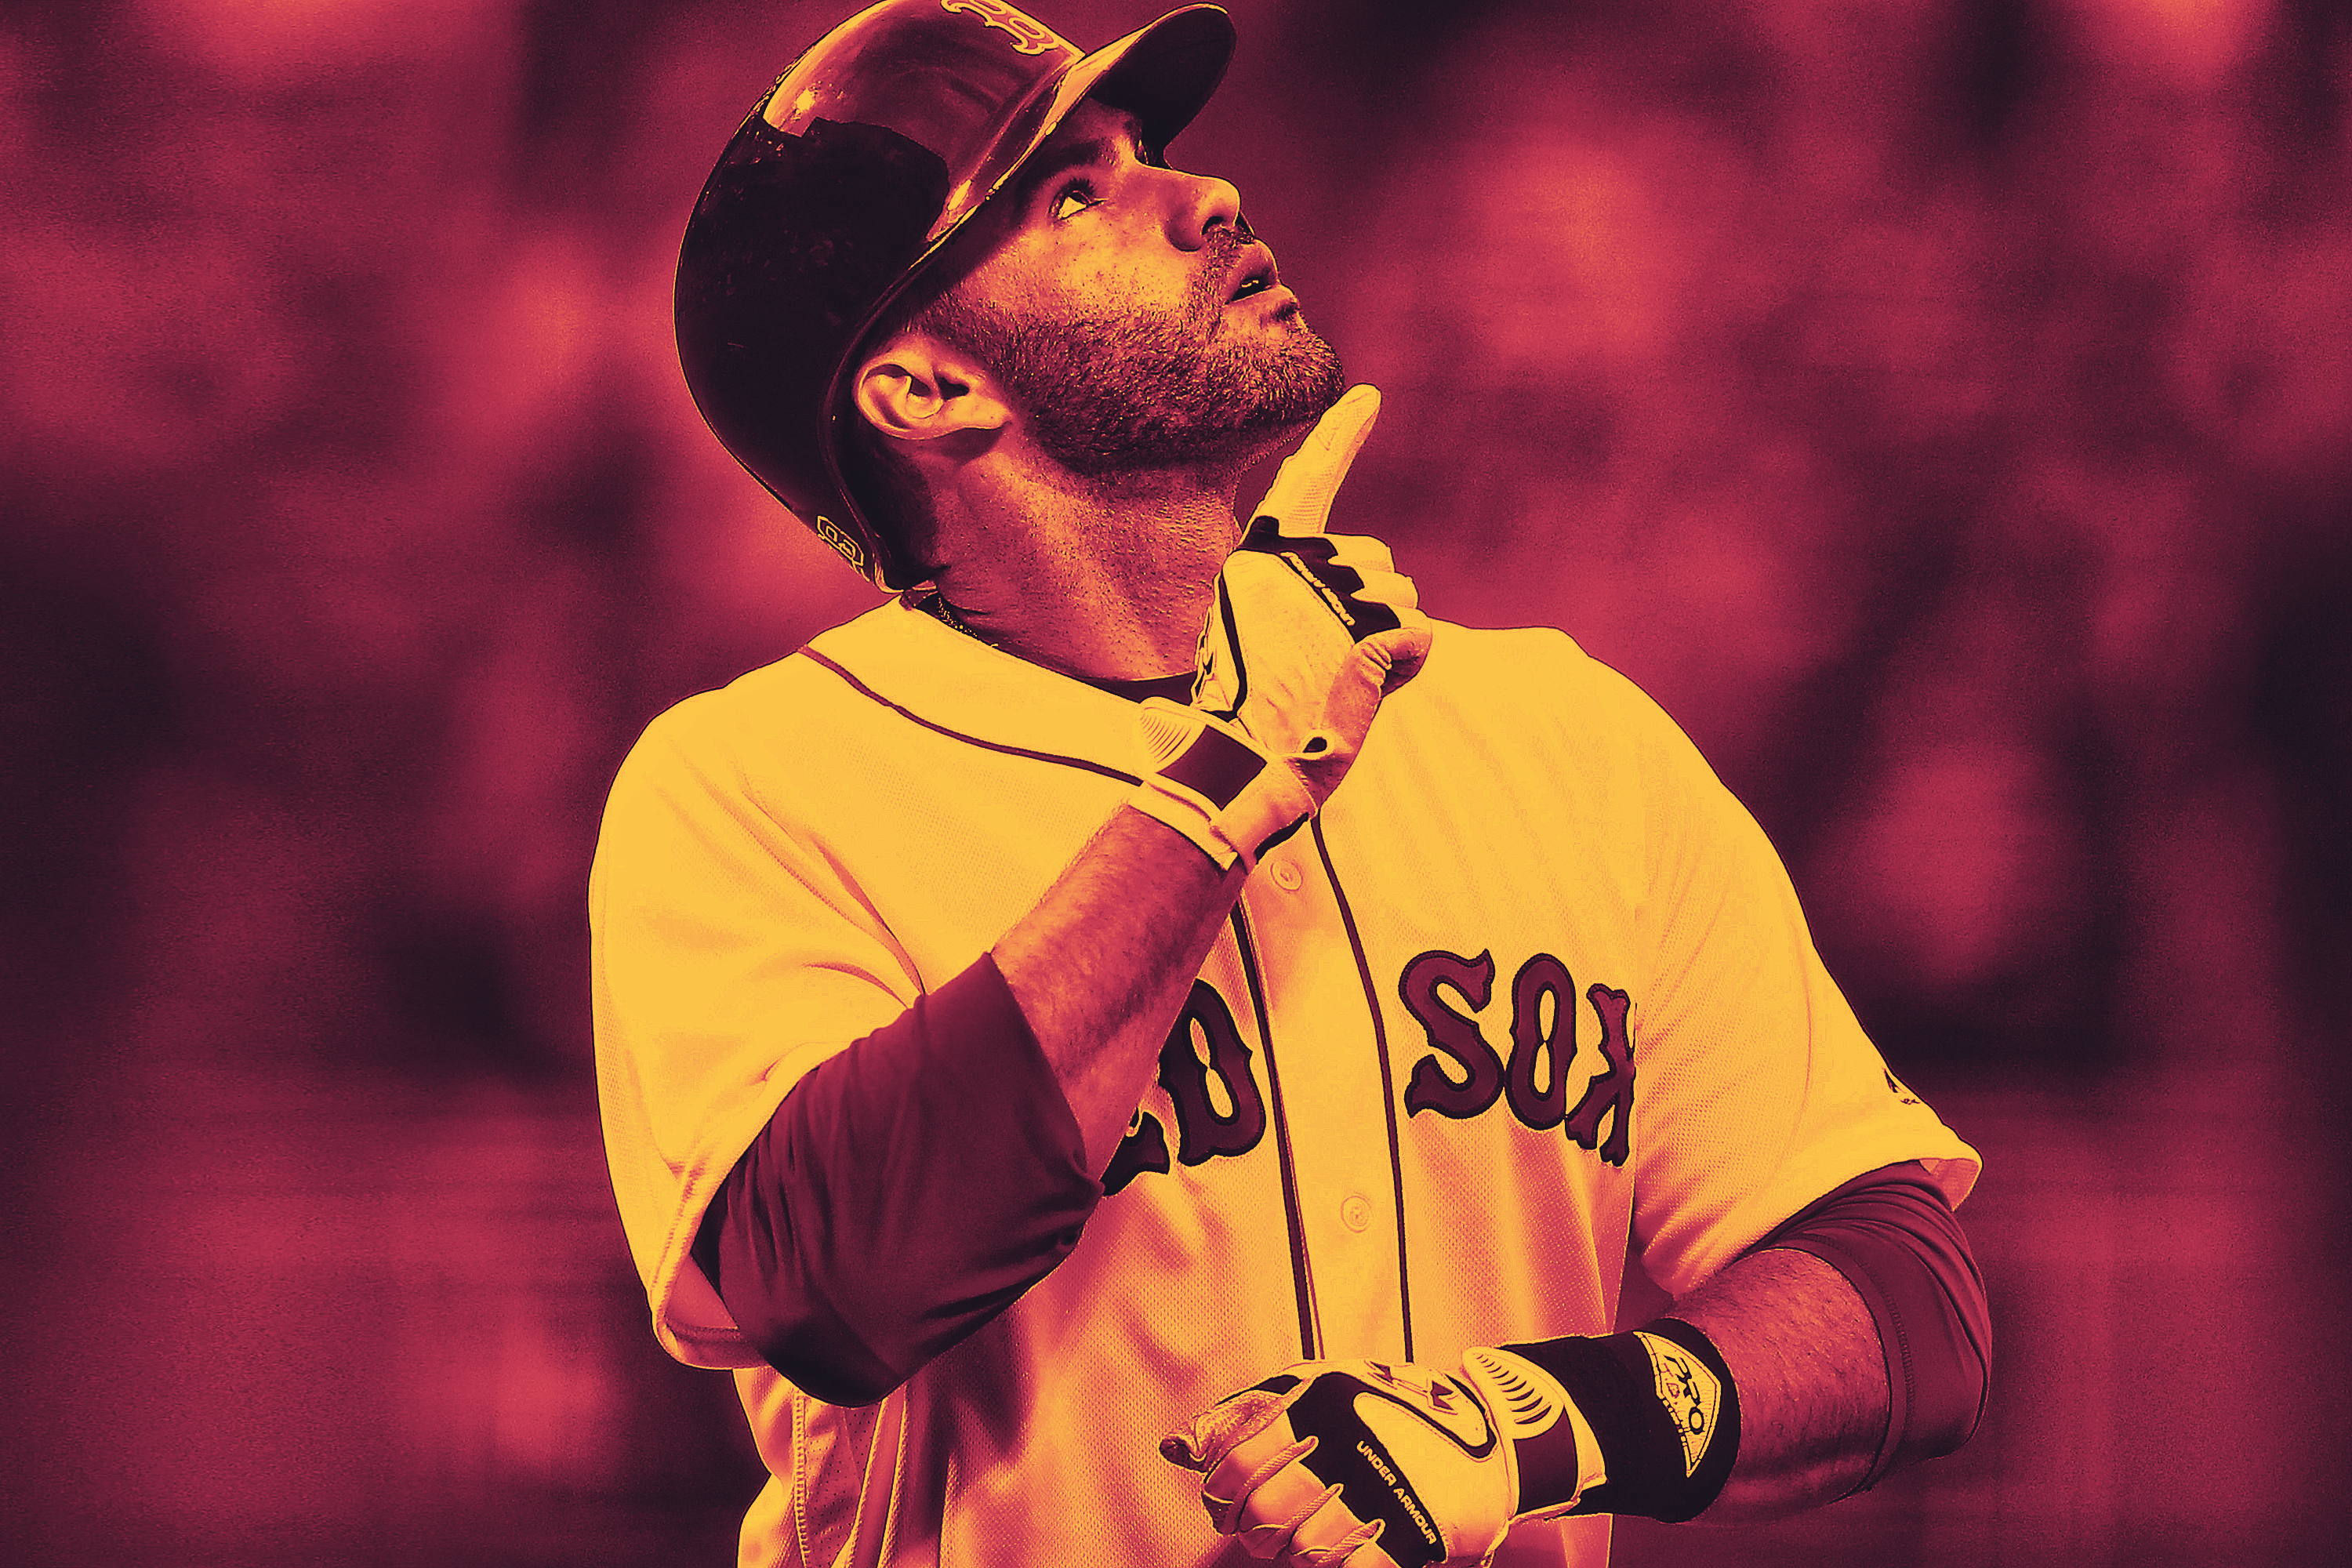 How J.D. Martinez Rose from Division II Obscurity, MLB Reject to